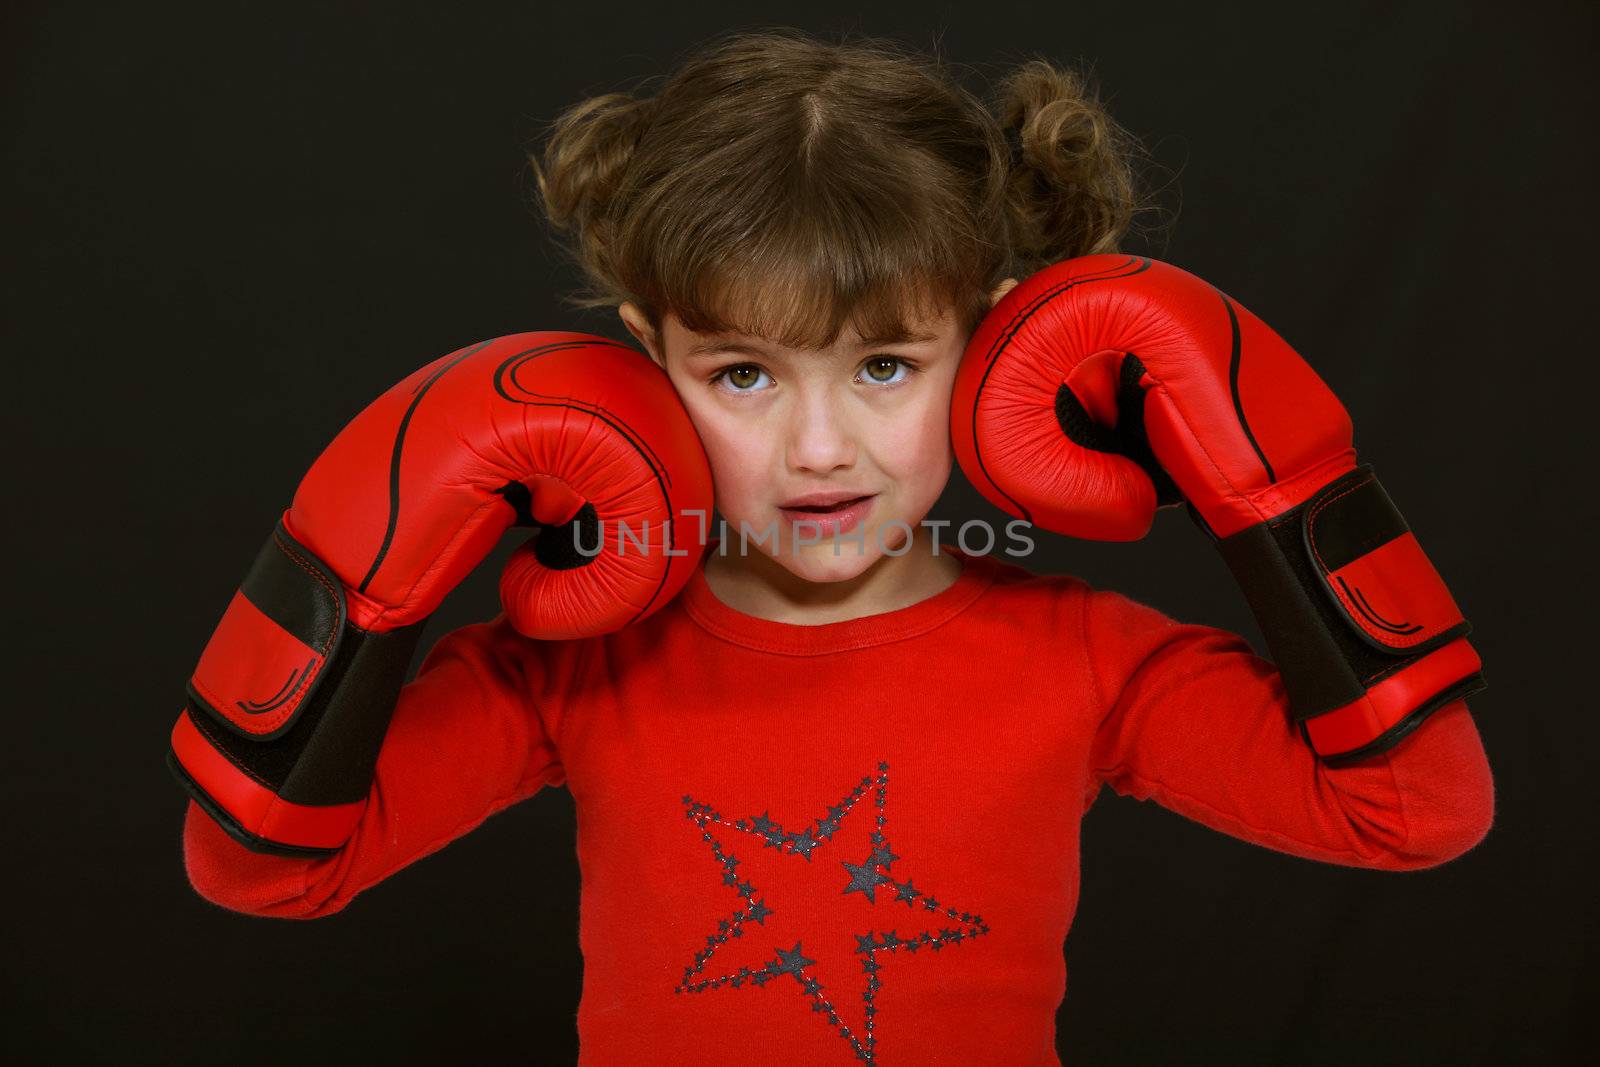 Little girl with boxing gloves